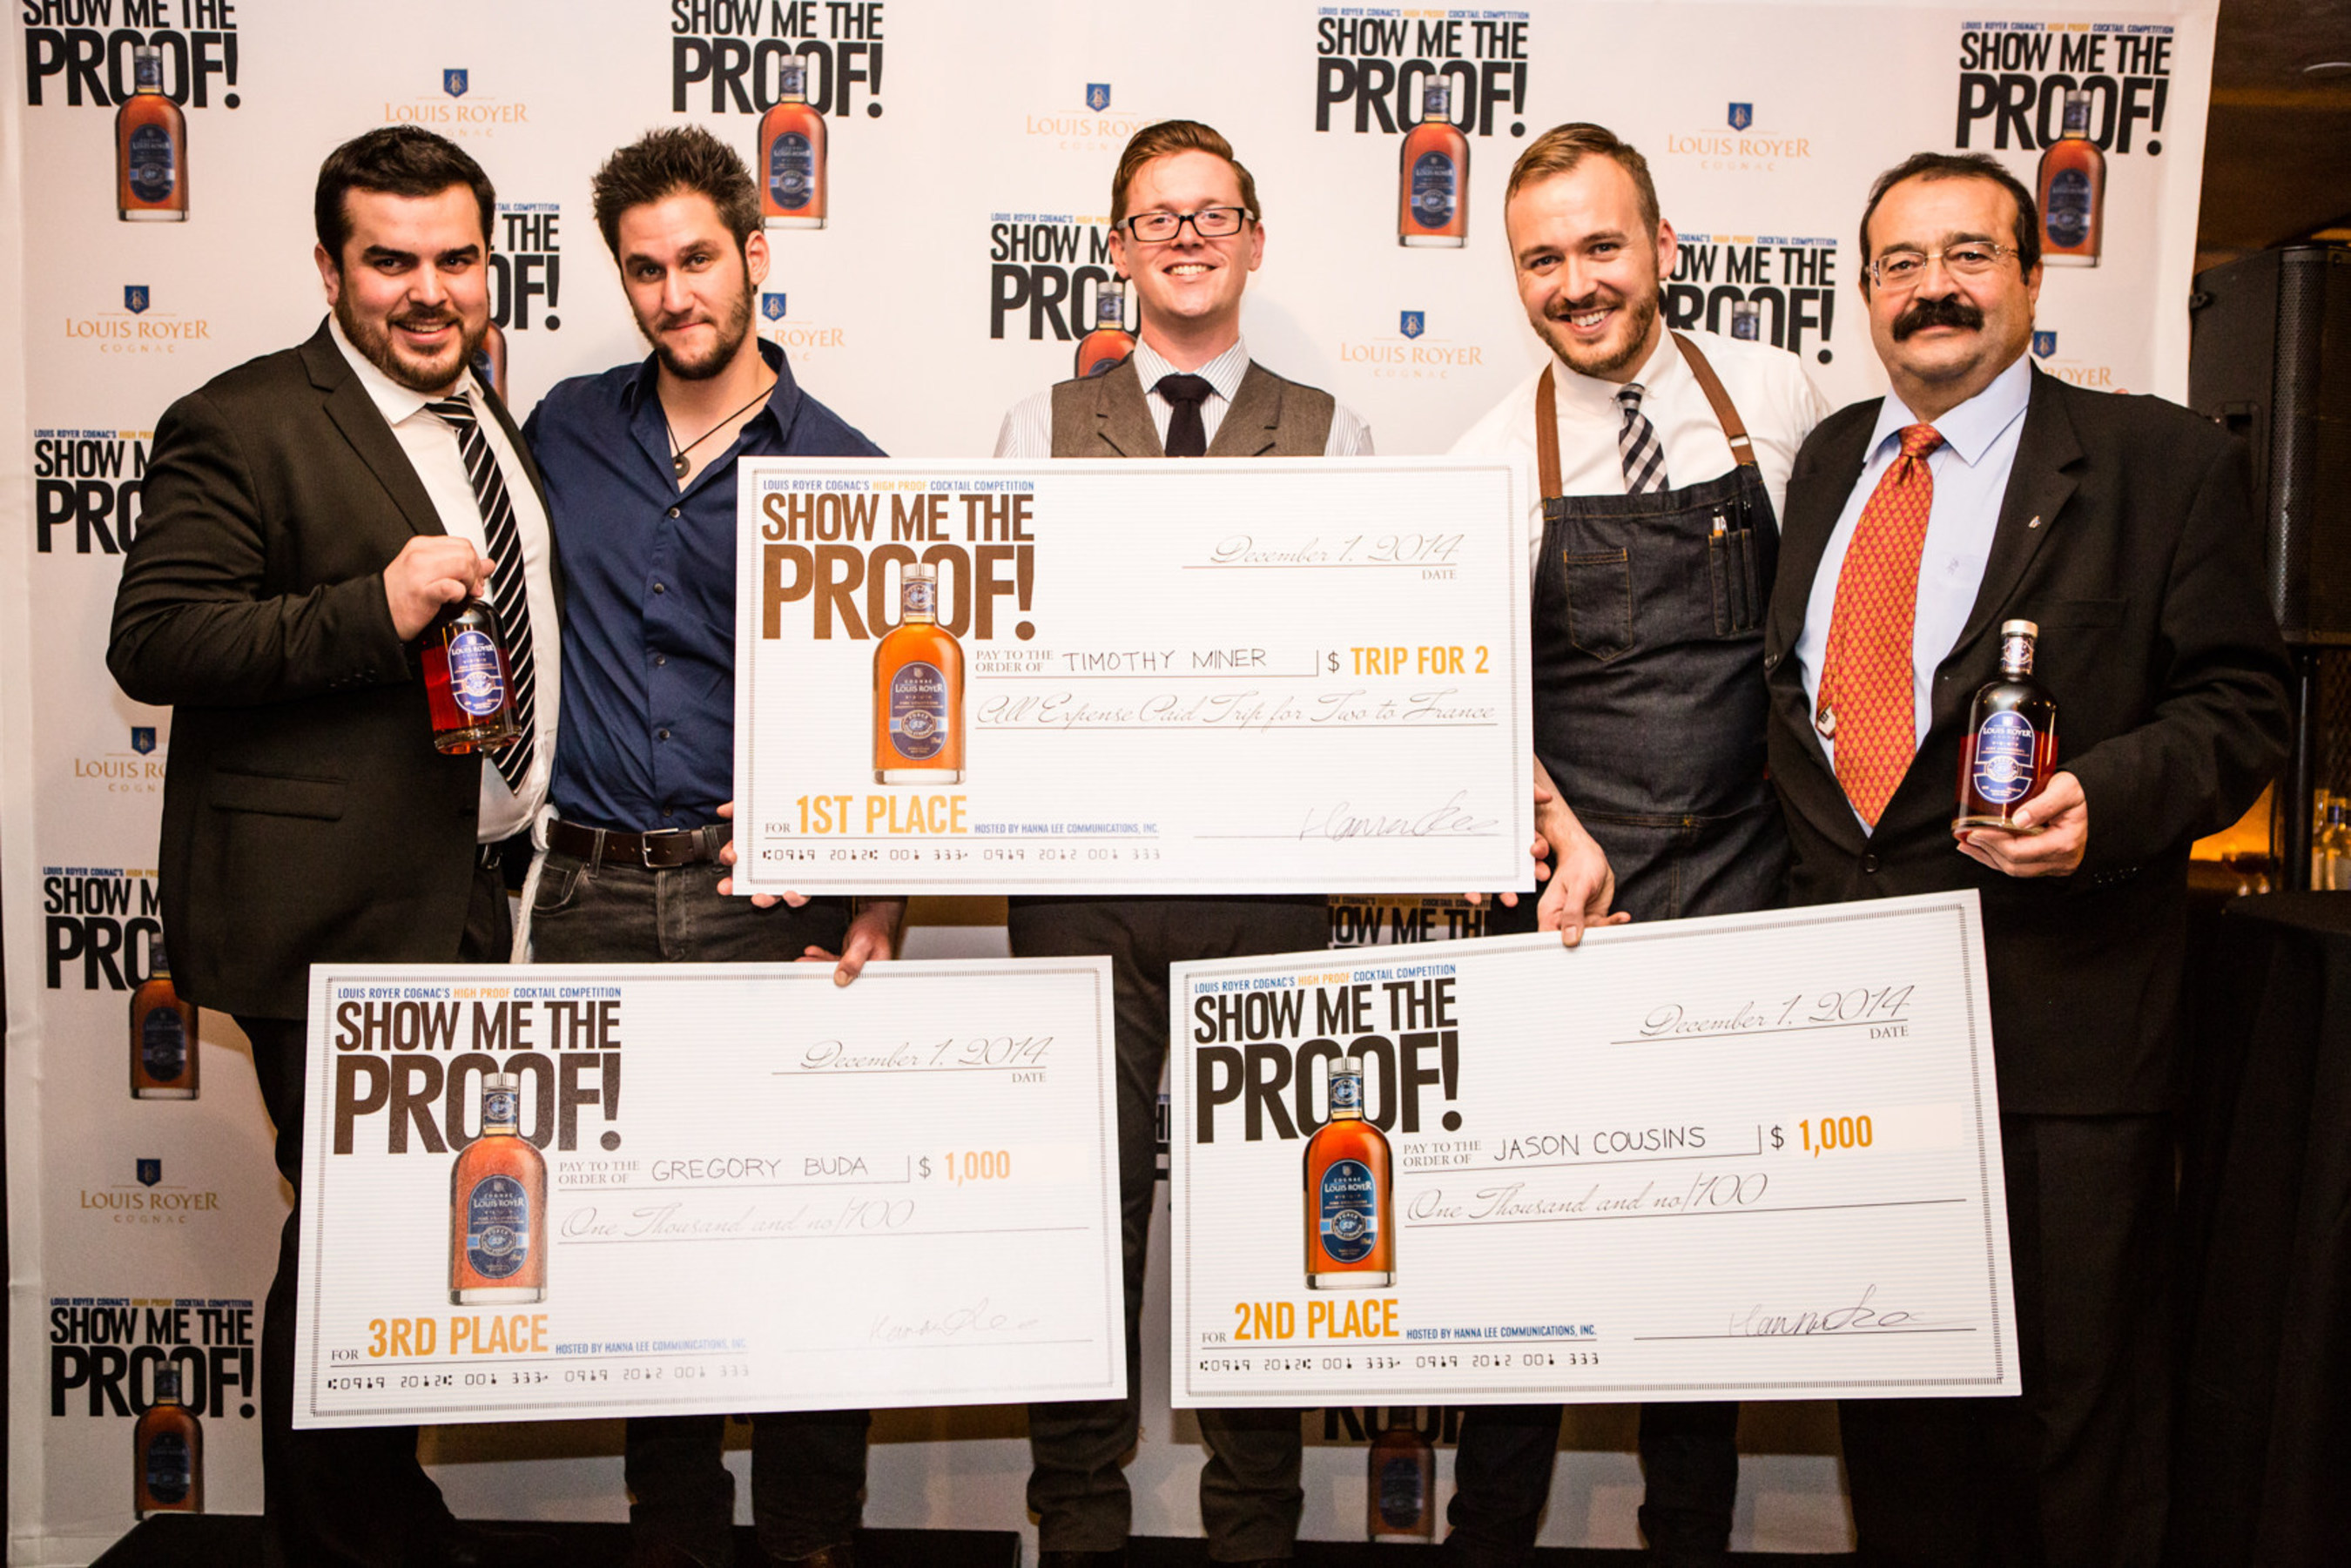 Louis Royer Cognac Announces Winners of Its Third "Show Me the Proof!" High Proof Cognac Cocktail Competition Spotlighting "Force 53" VSOP Cognac: Timothy Miner (The Long Island Bar), Jason Cousins (Da Claudio) and Gregory Buda (The Dead Rabbit)